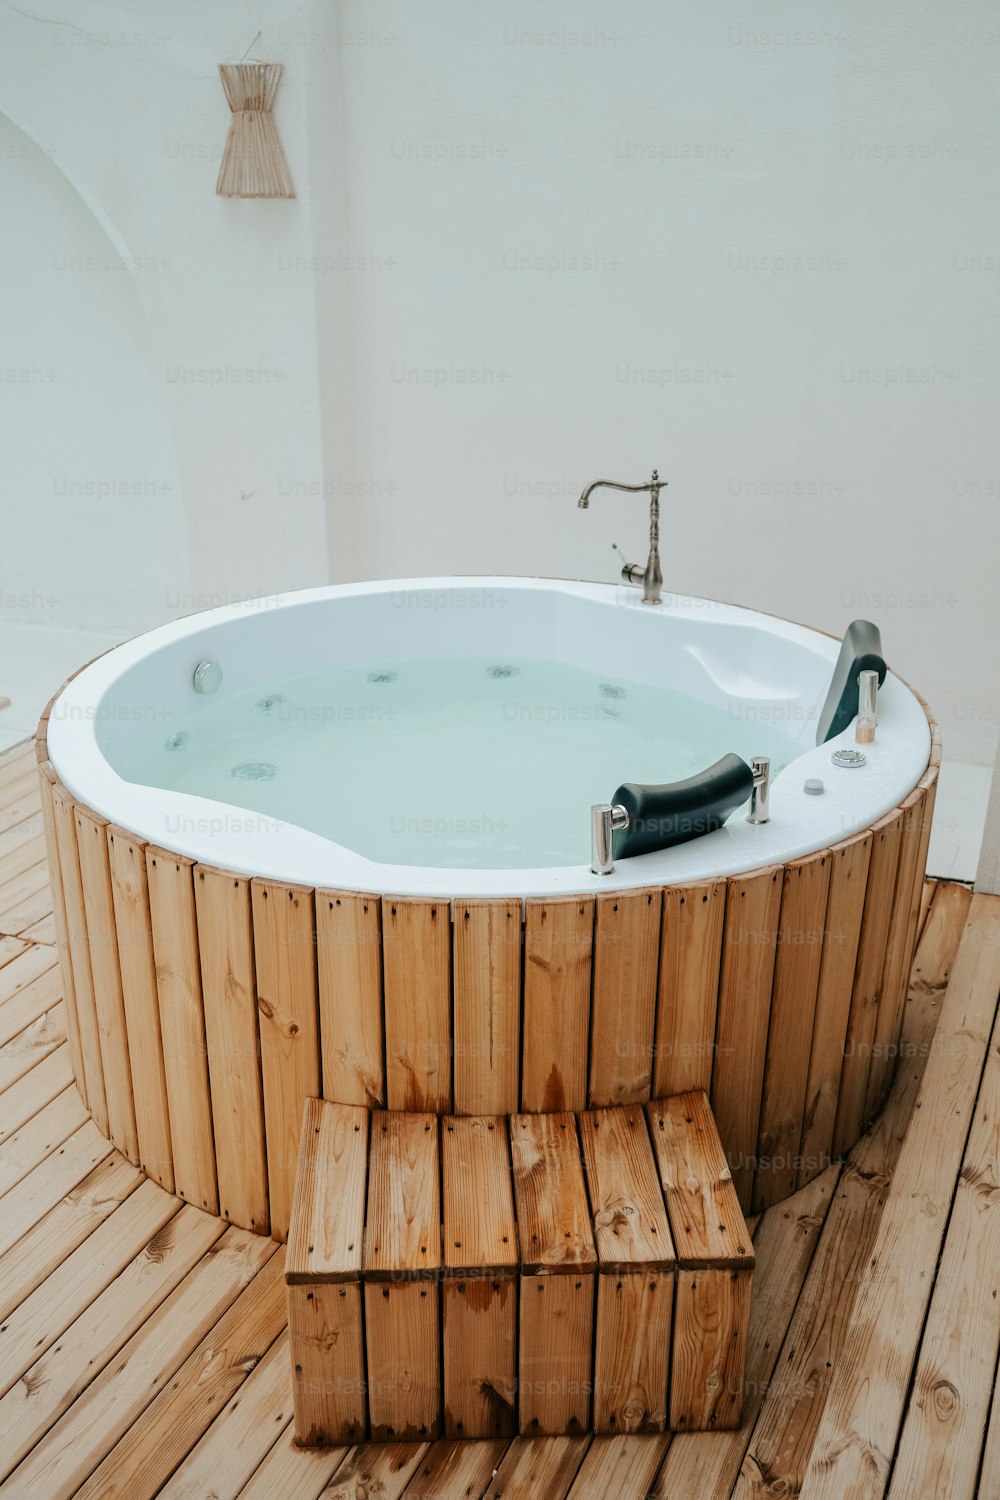 a hot tub sitting on top of a wooden floor